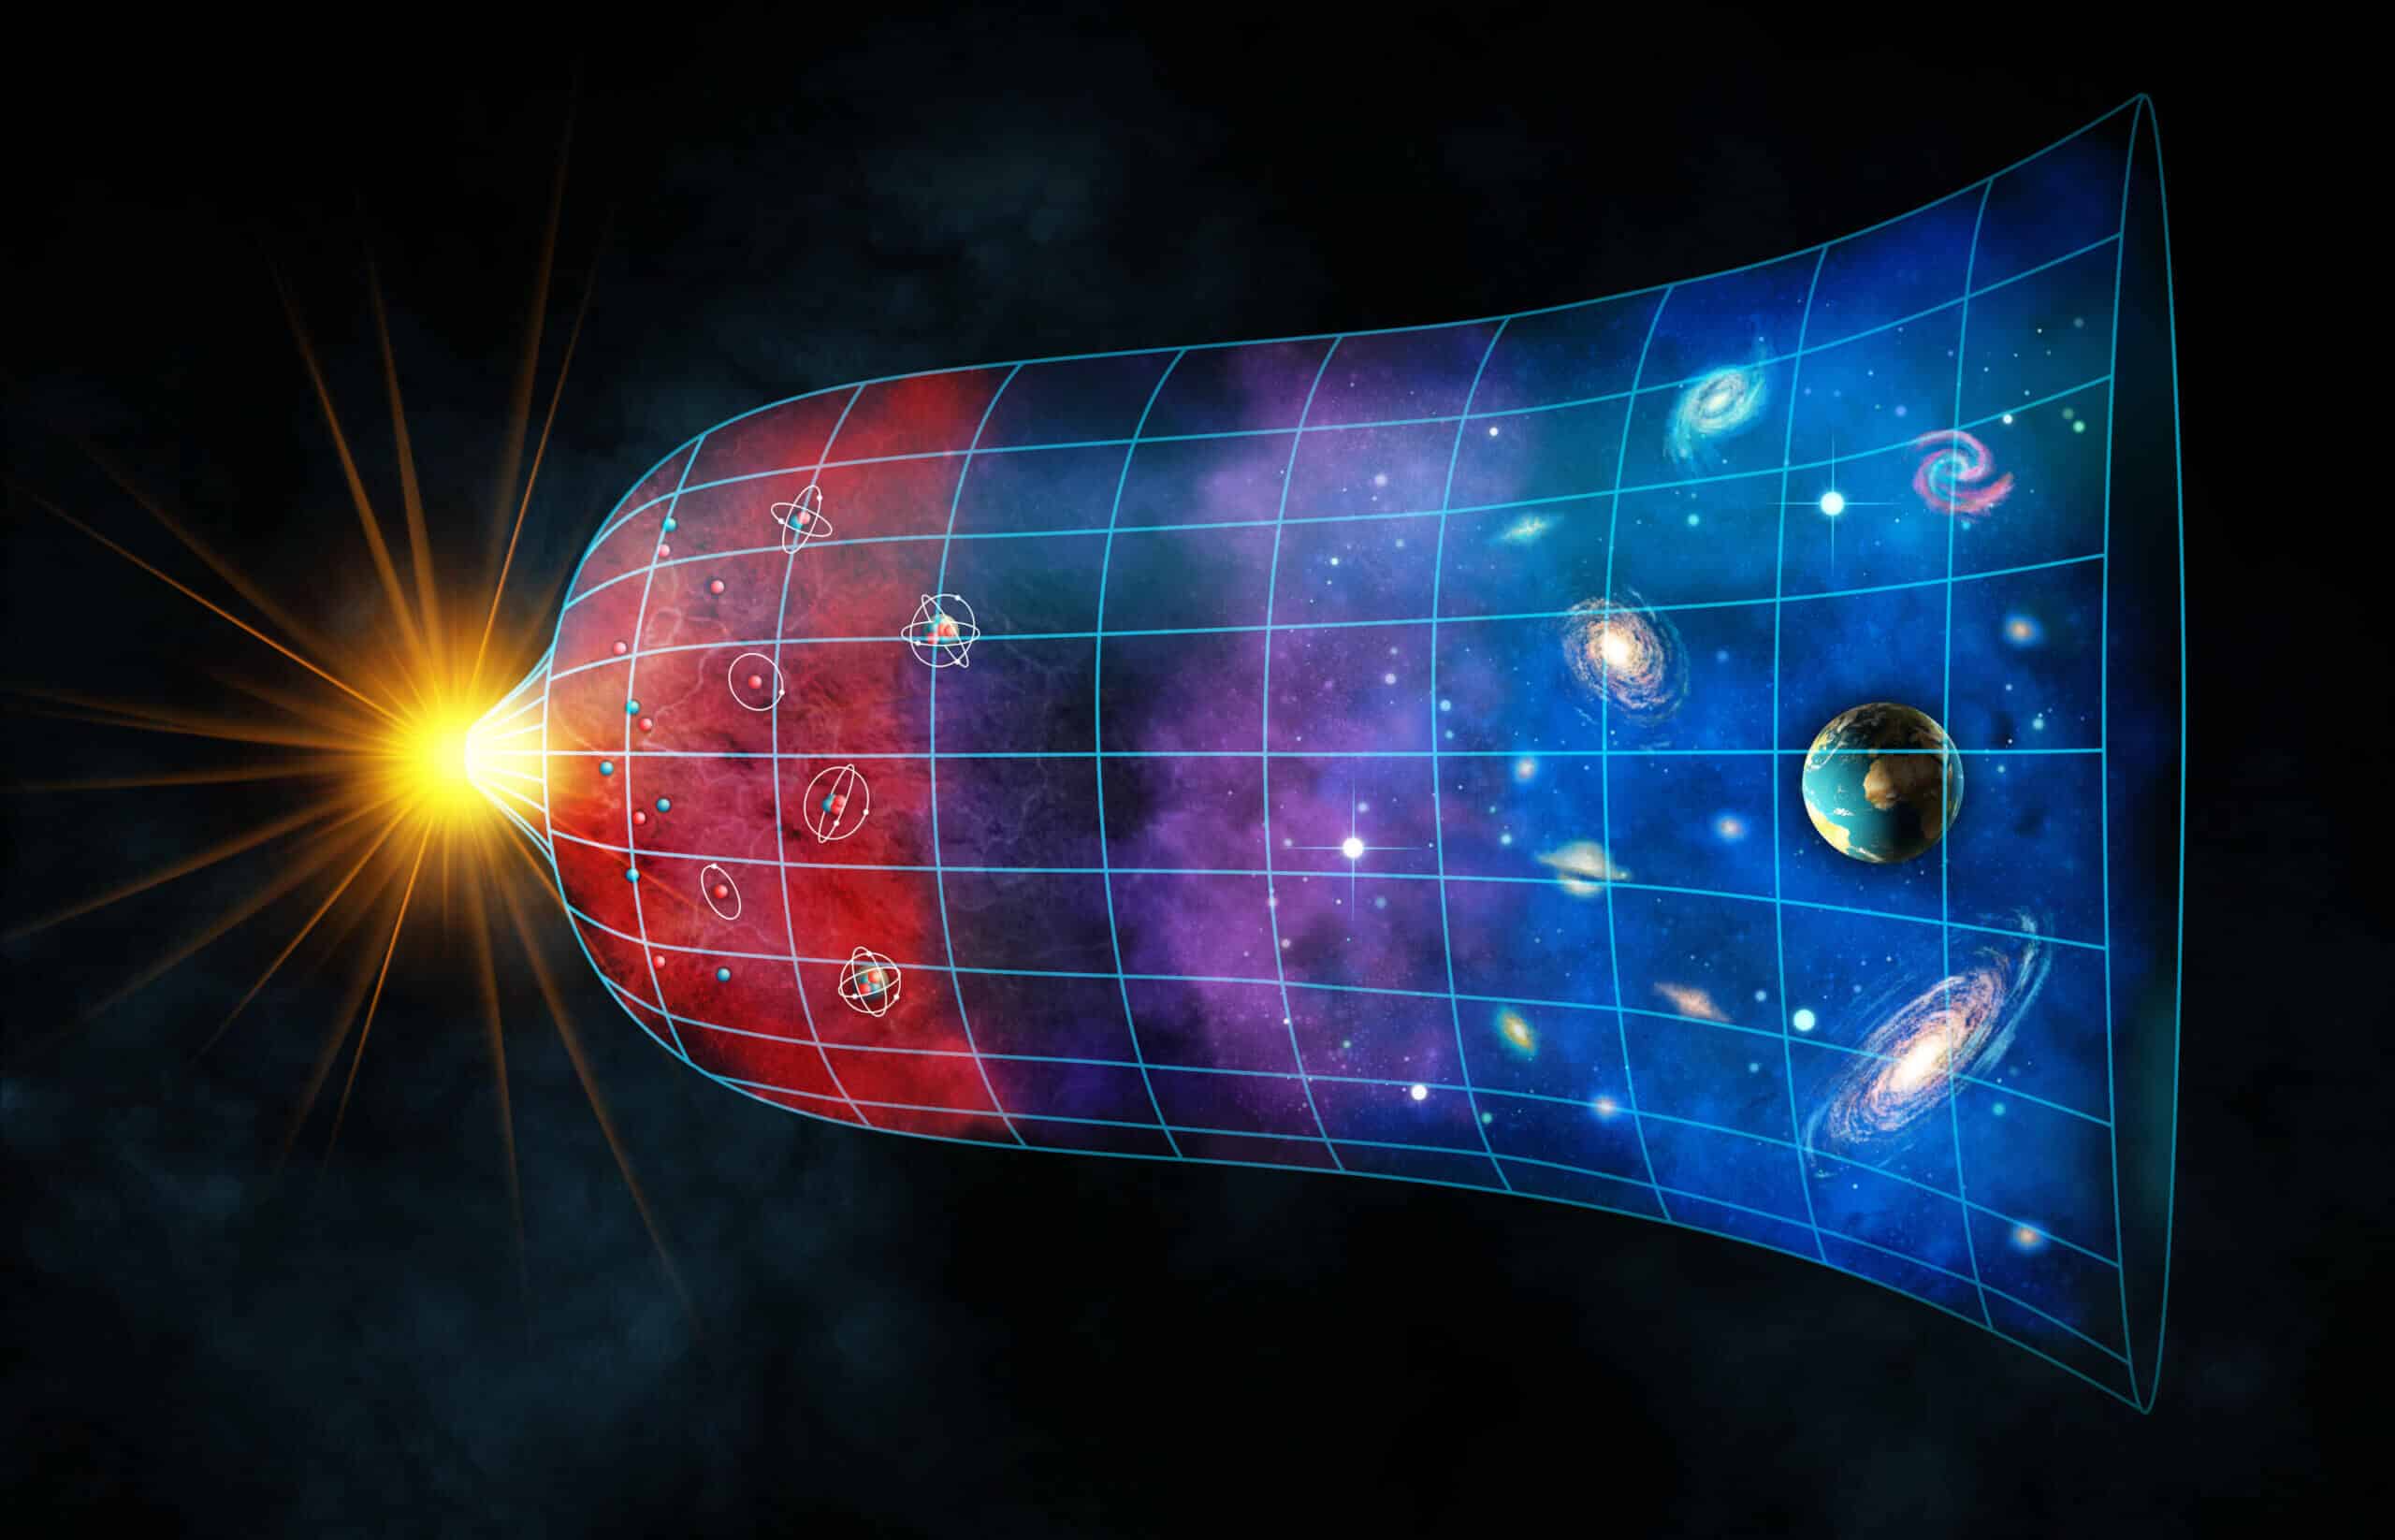 The early universe - from the big bang to the creation of the stars. Image: depositphotos.com